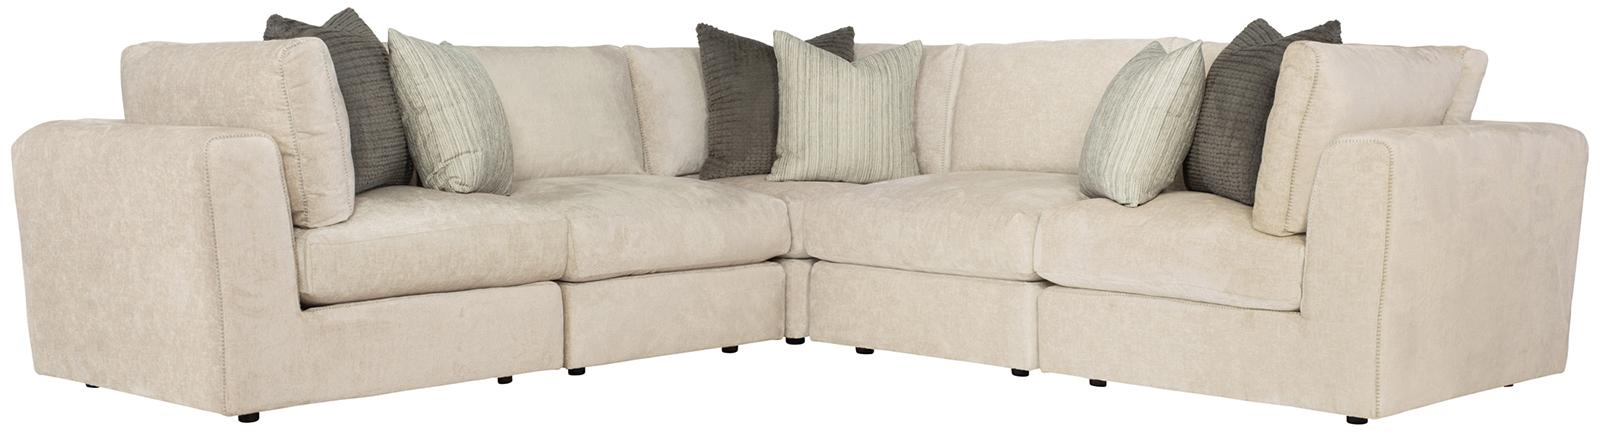 Bernhardt Oasis Sectional in Gray image